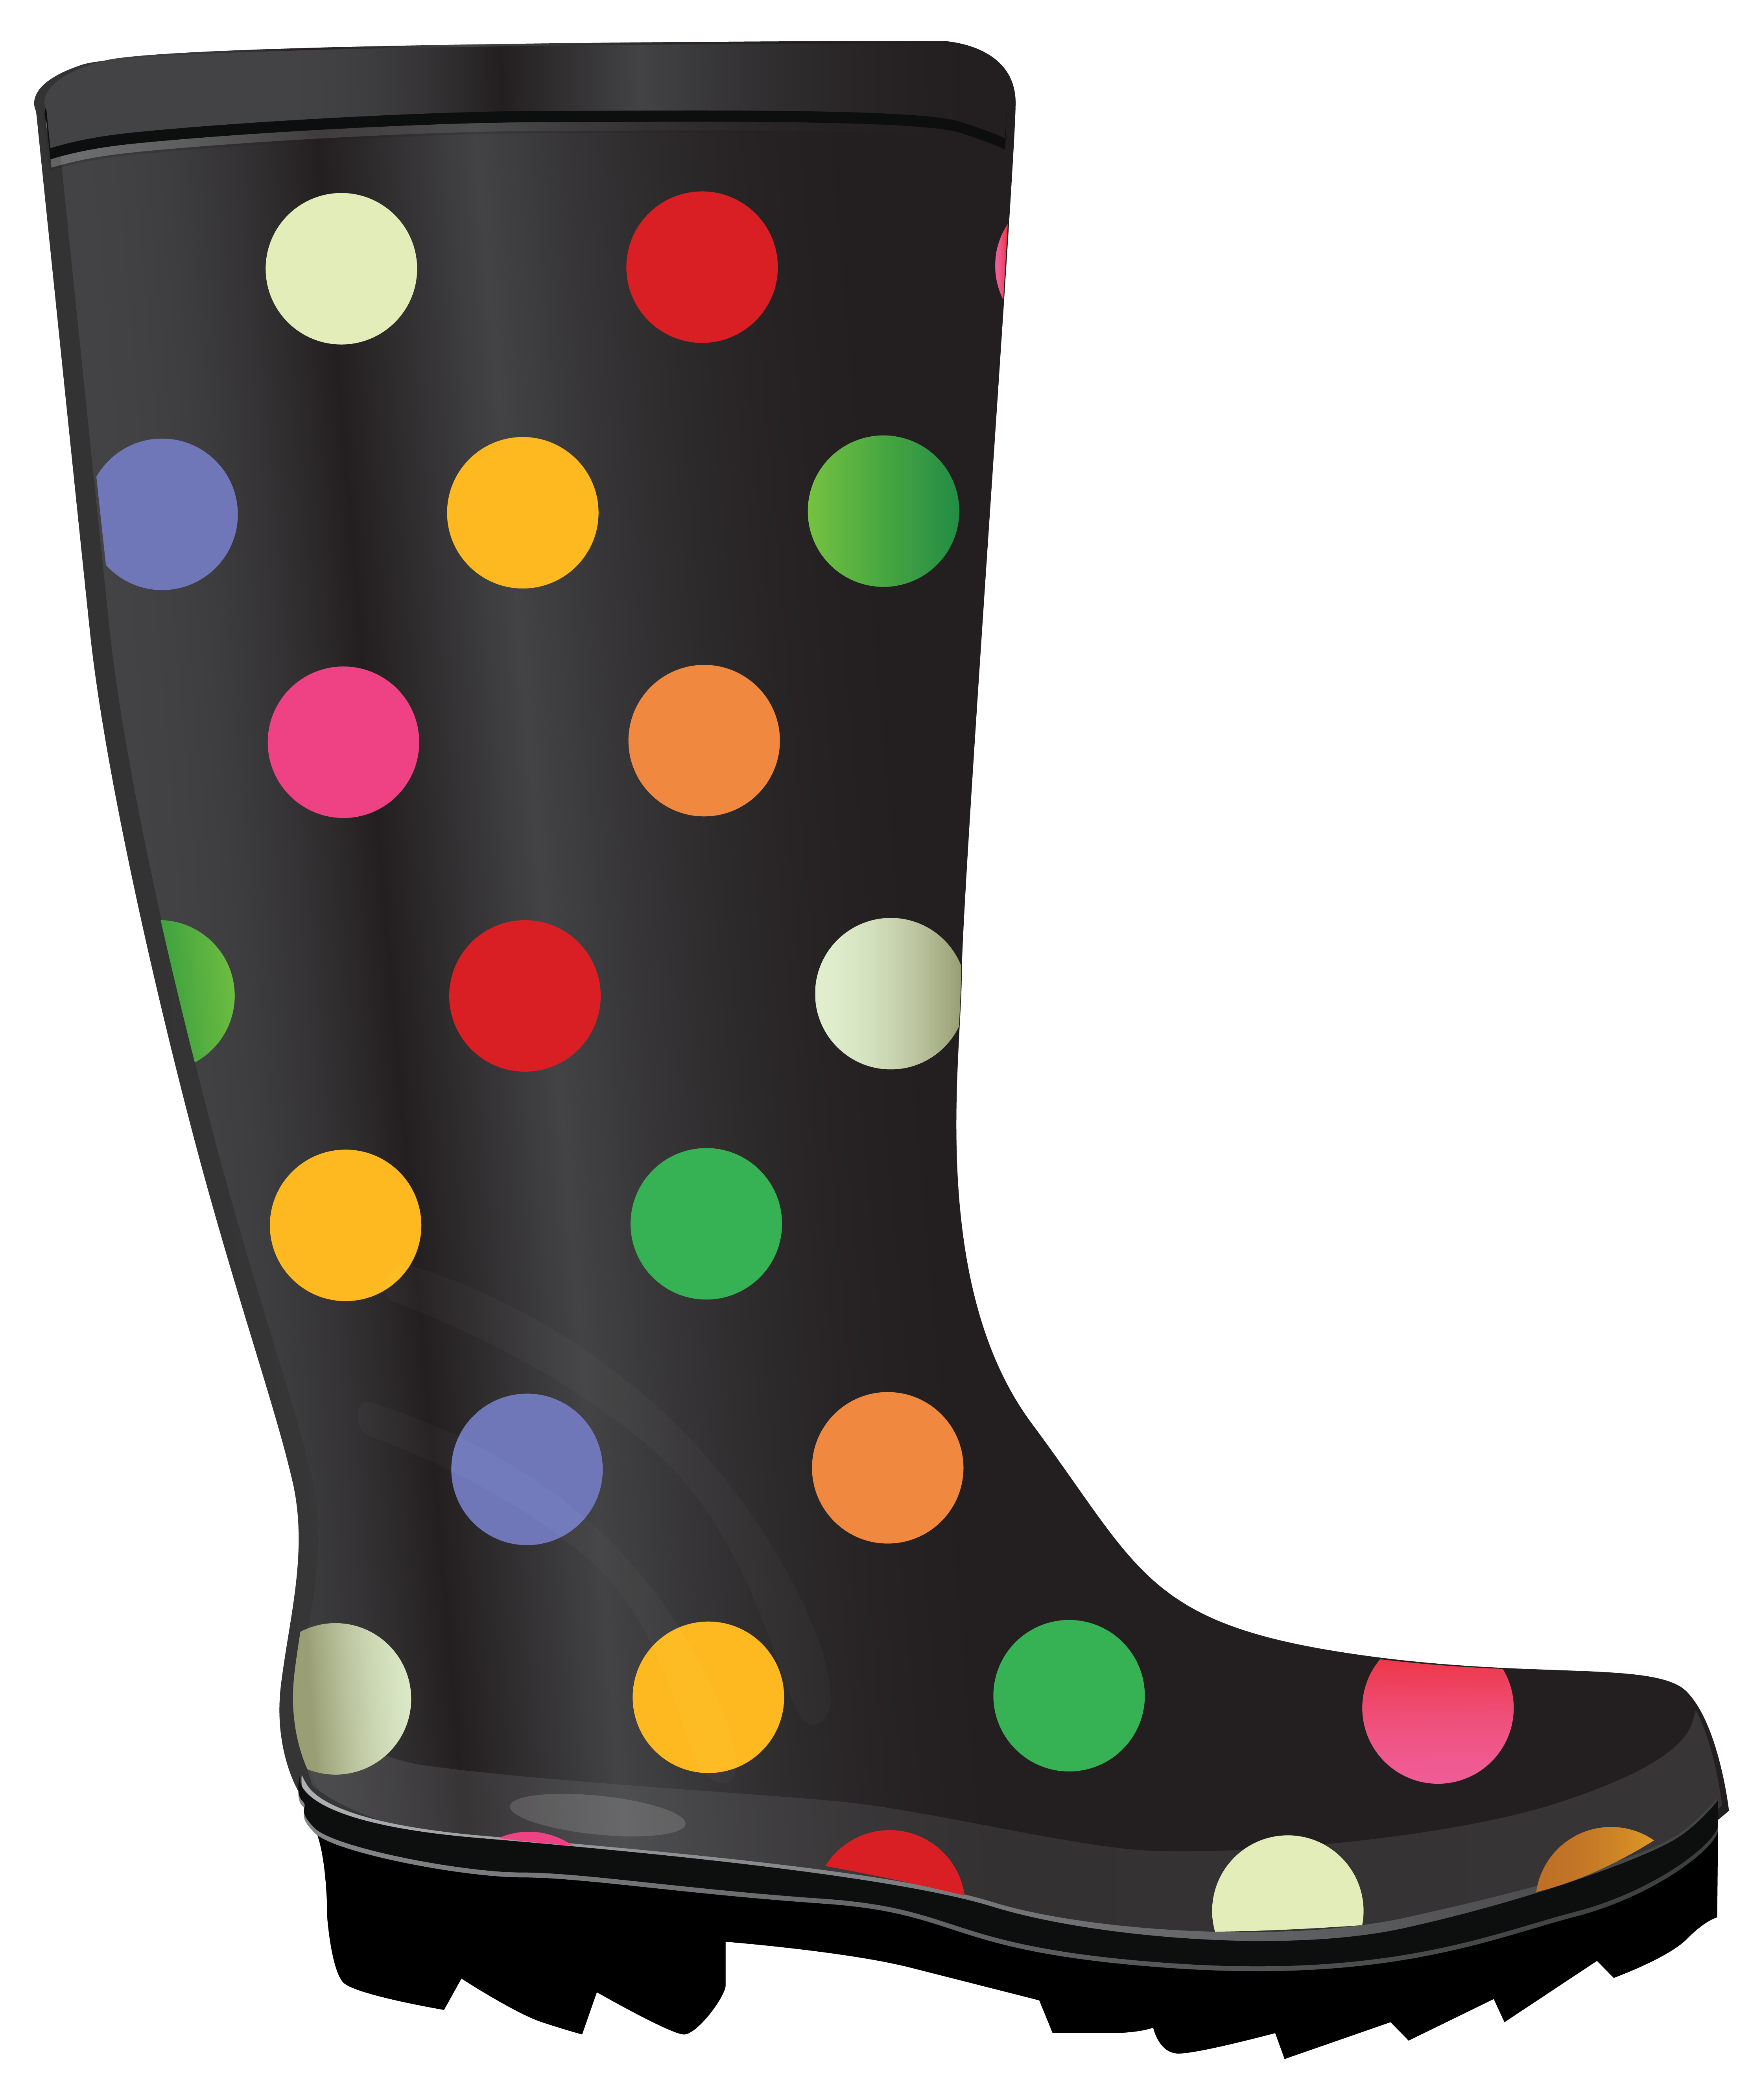 Dotted Rubber Boots. - Rubber Boots, Transparent background PNG HD thumbnail